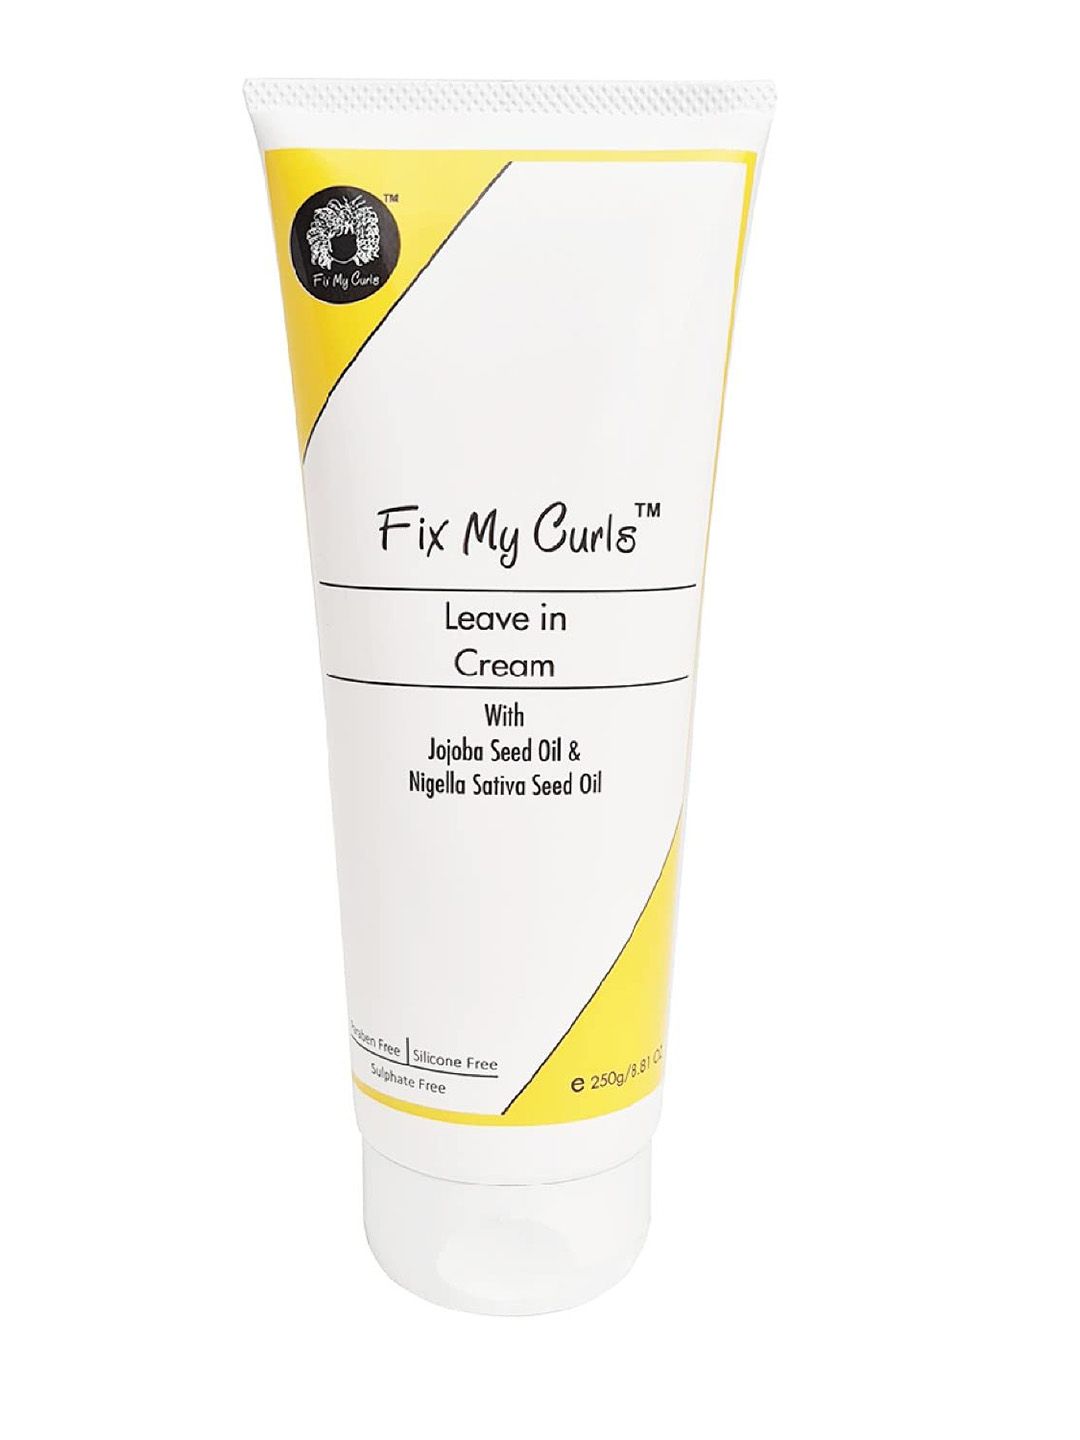 Fix My Curls Leave in Cream For Curly And Wavy Hair 250 gm Price in India